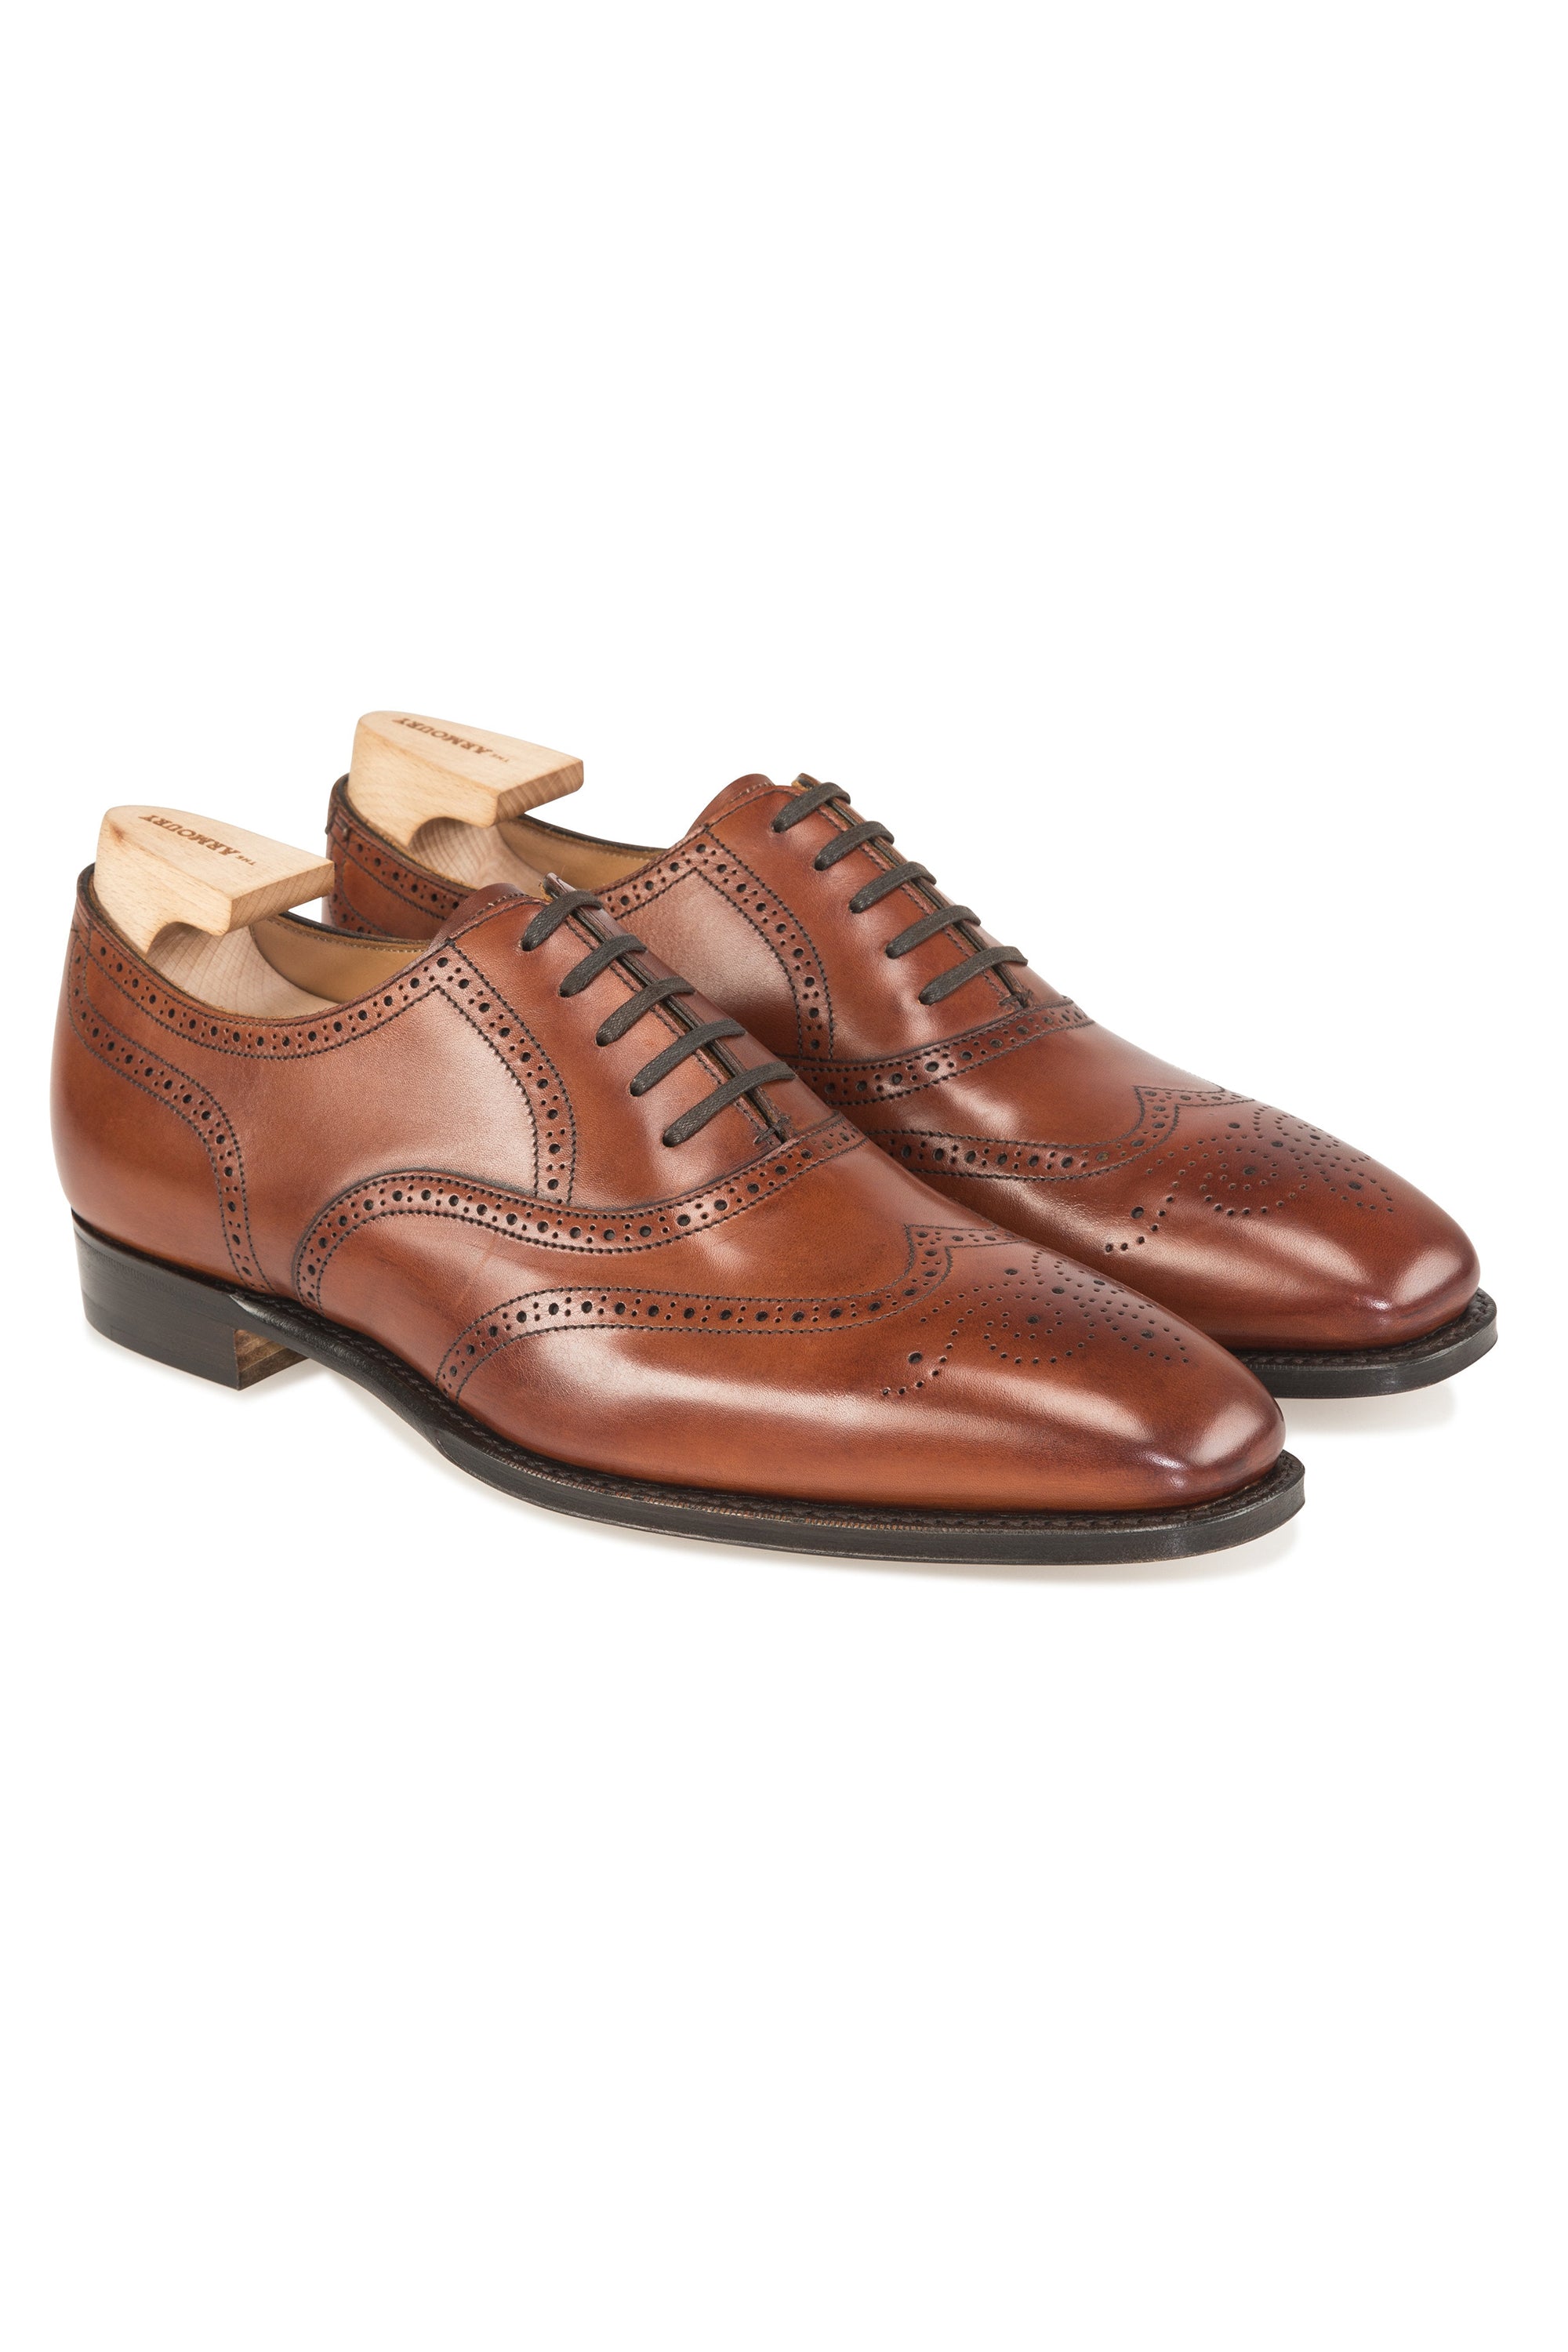 The Armoury Hajime 100355 Gloucester Chestnut Calf Oxford Shoes *factory seconds*